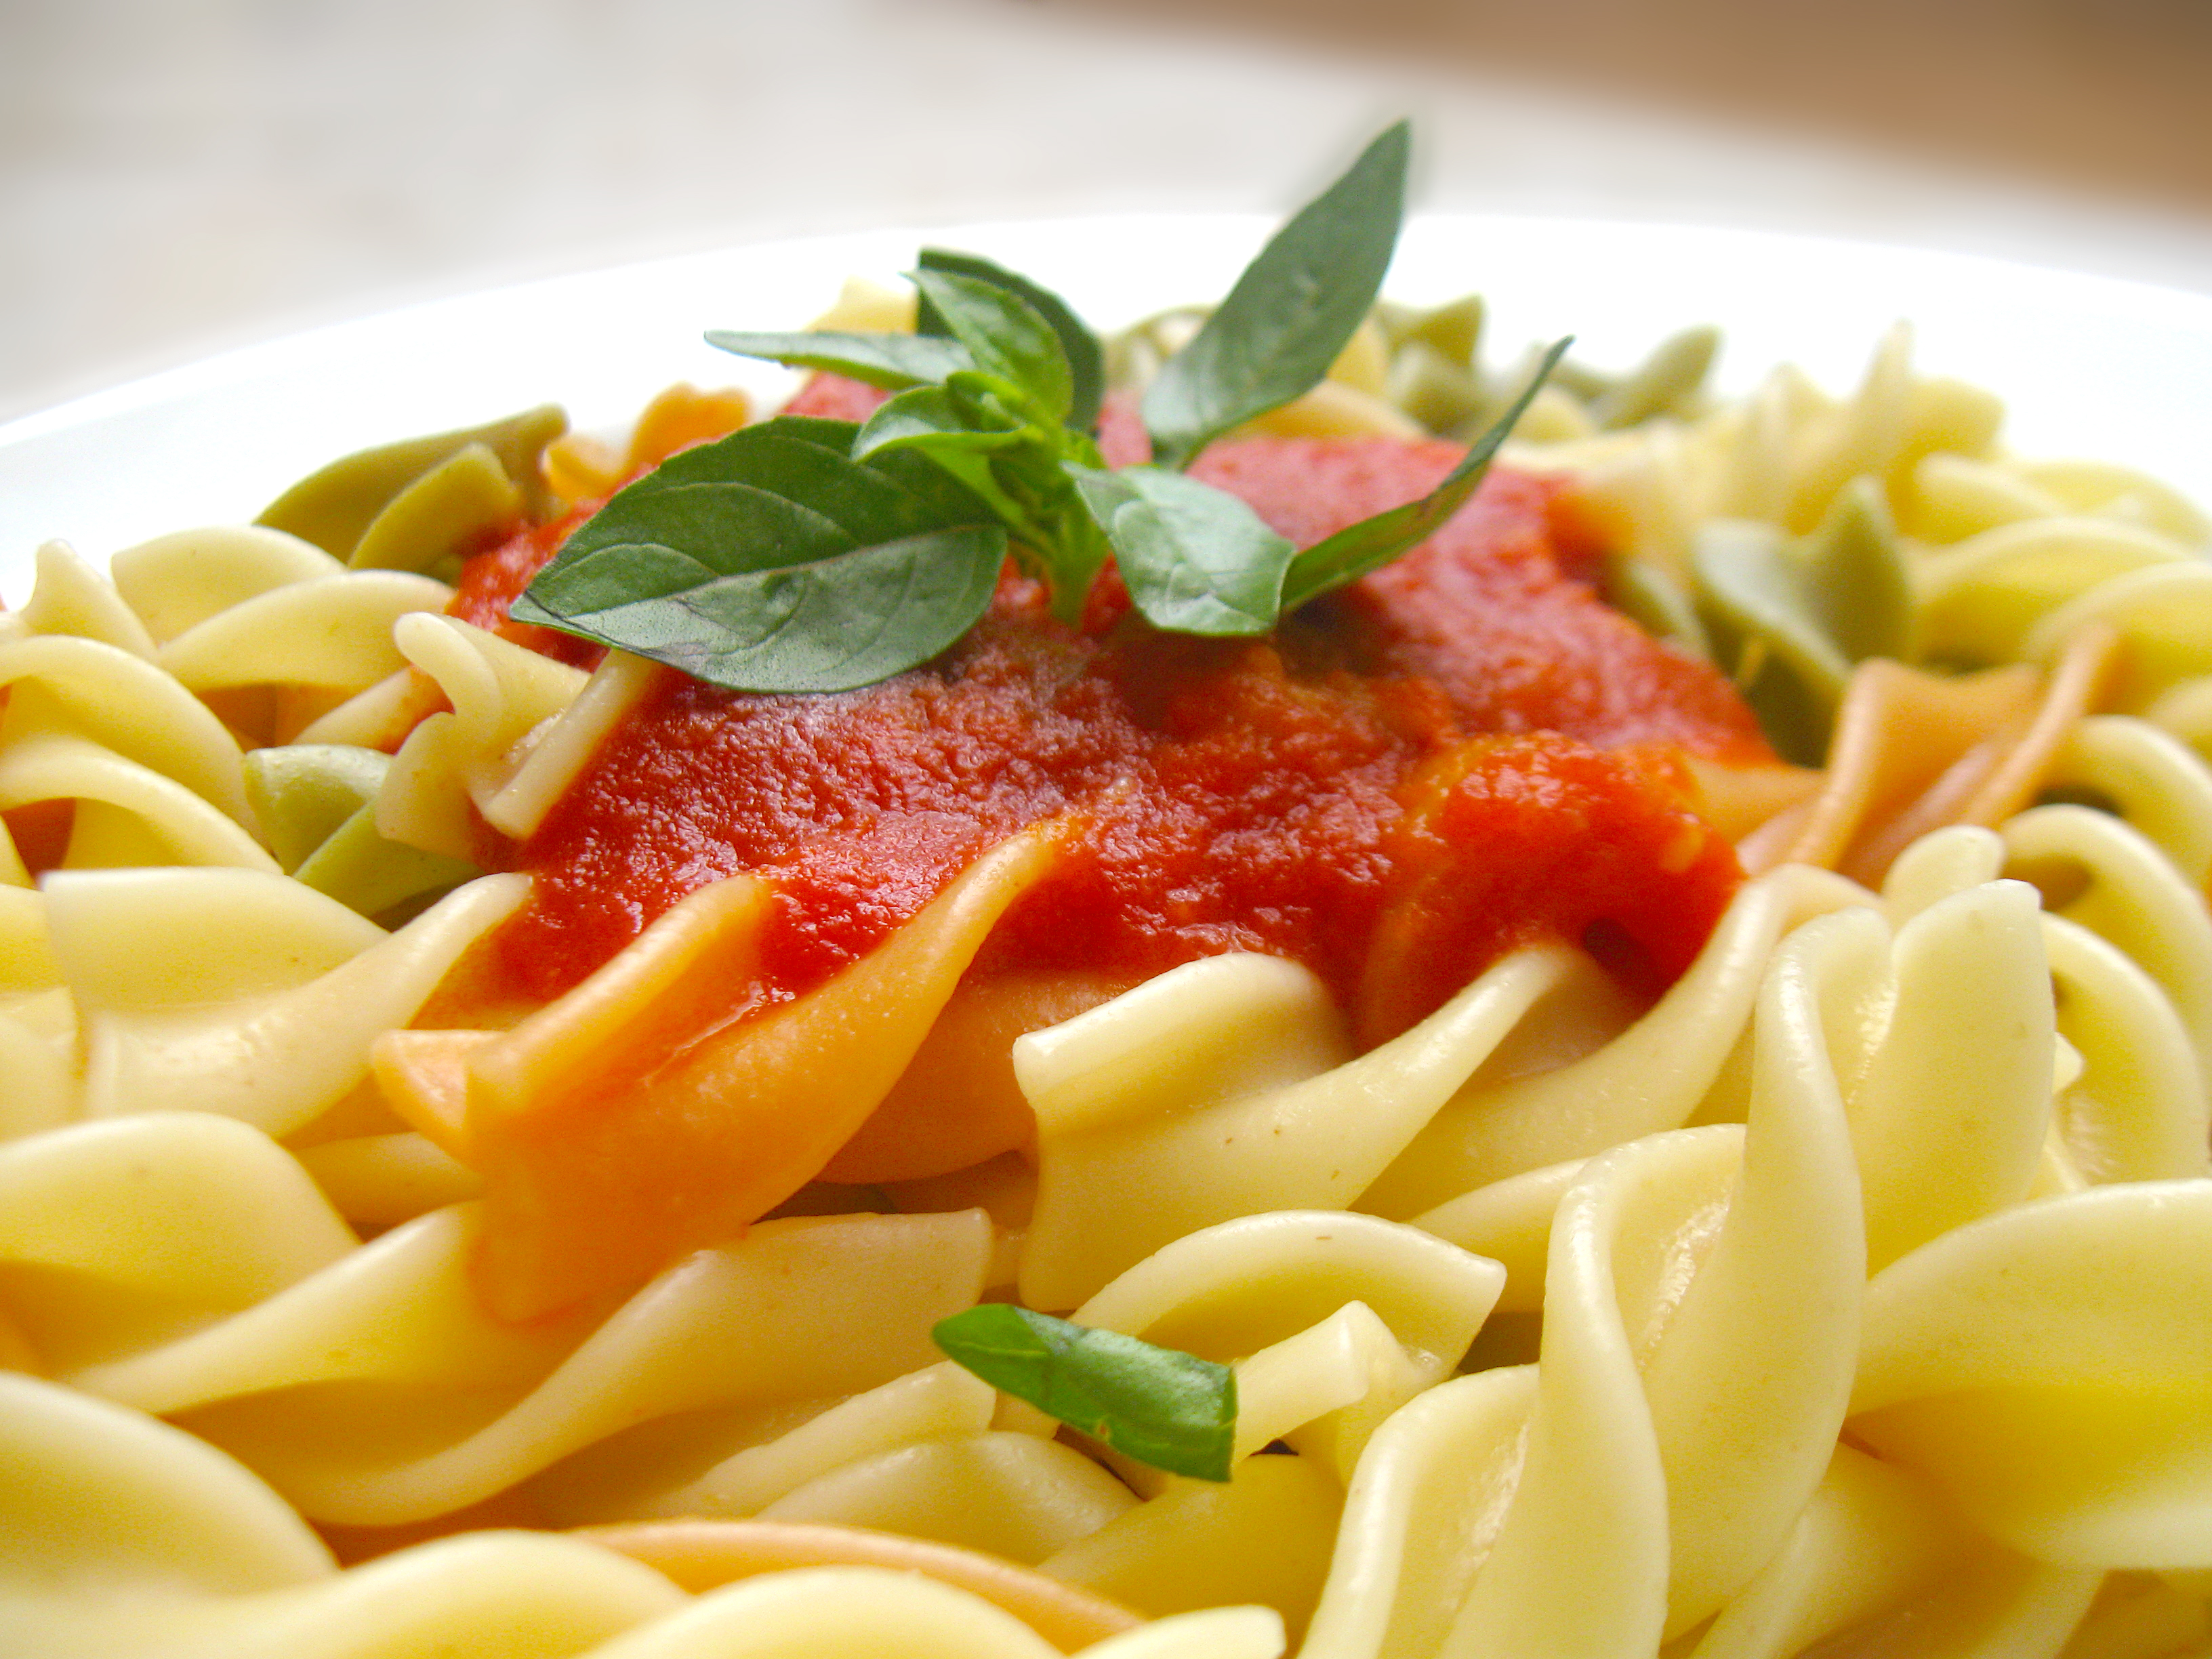 Download this Ranked High The List And Nothing Says Italian Food Like Pasta picture